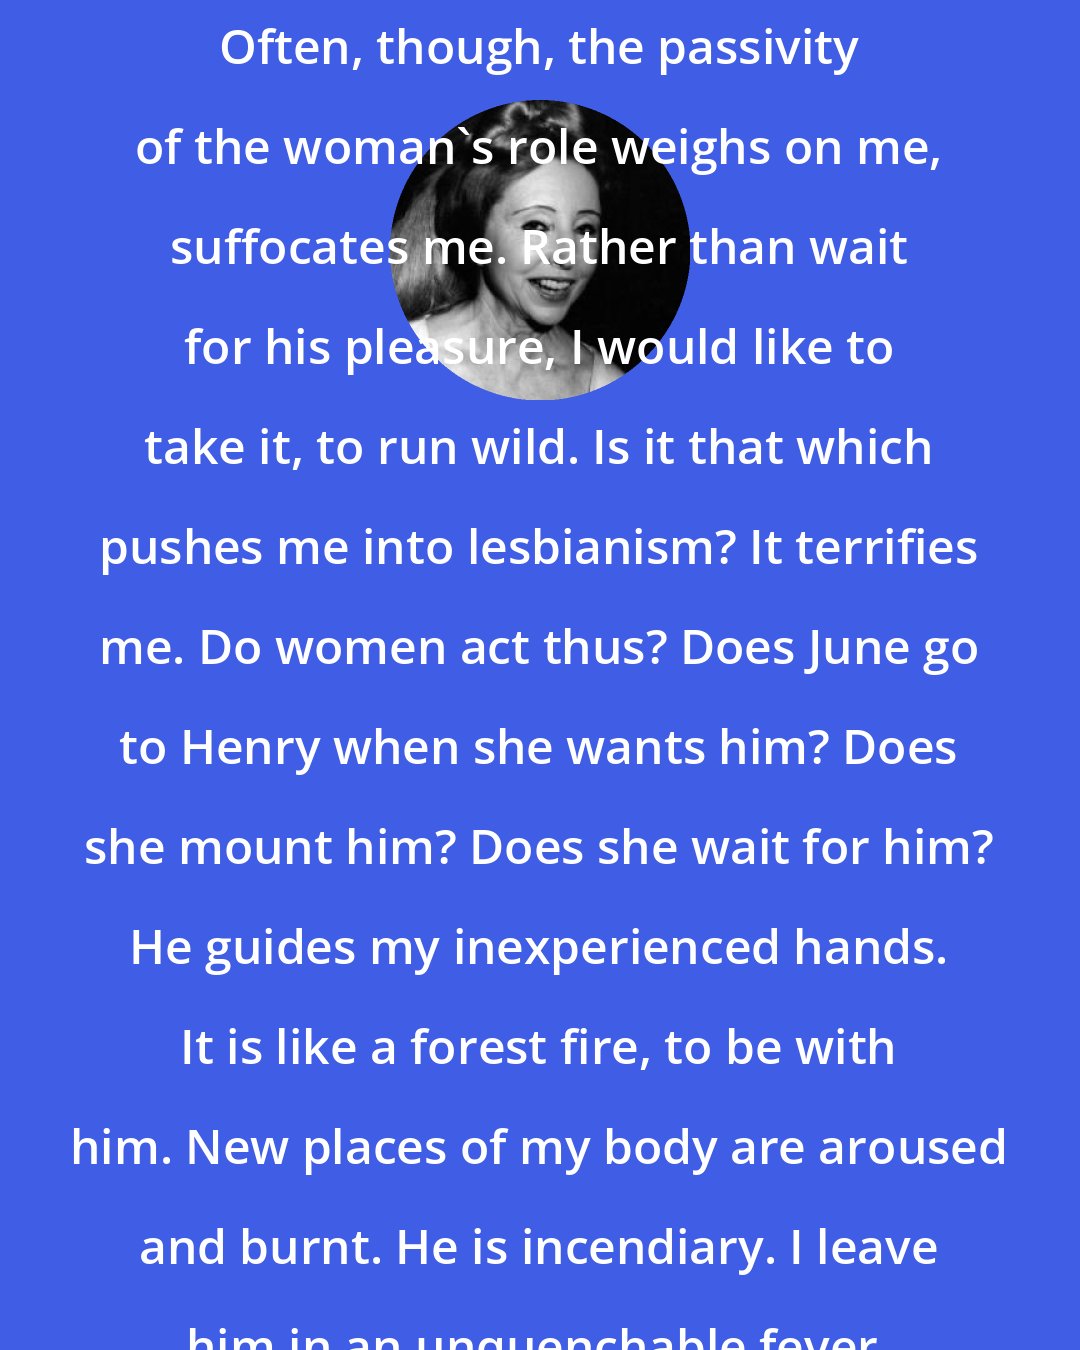 Anais Nin: Often, though, the passivity of the woman's role weighs on me, suffocates me. Rather than wait for his pleasure, I would like to take it, to run wild. Is it that which pushes me into lesbianism? It terrifies me. Do women act thus? Does June go to Henry when she wants him? Does she mount him? Does she wait for him? He guides my inexperienced hands. It is like a forest fire, to be with him. New places of my body are aroused and burnt. He is incendiary. I leave him in an unquenchable fever.